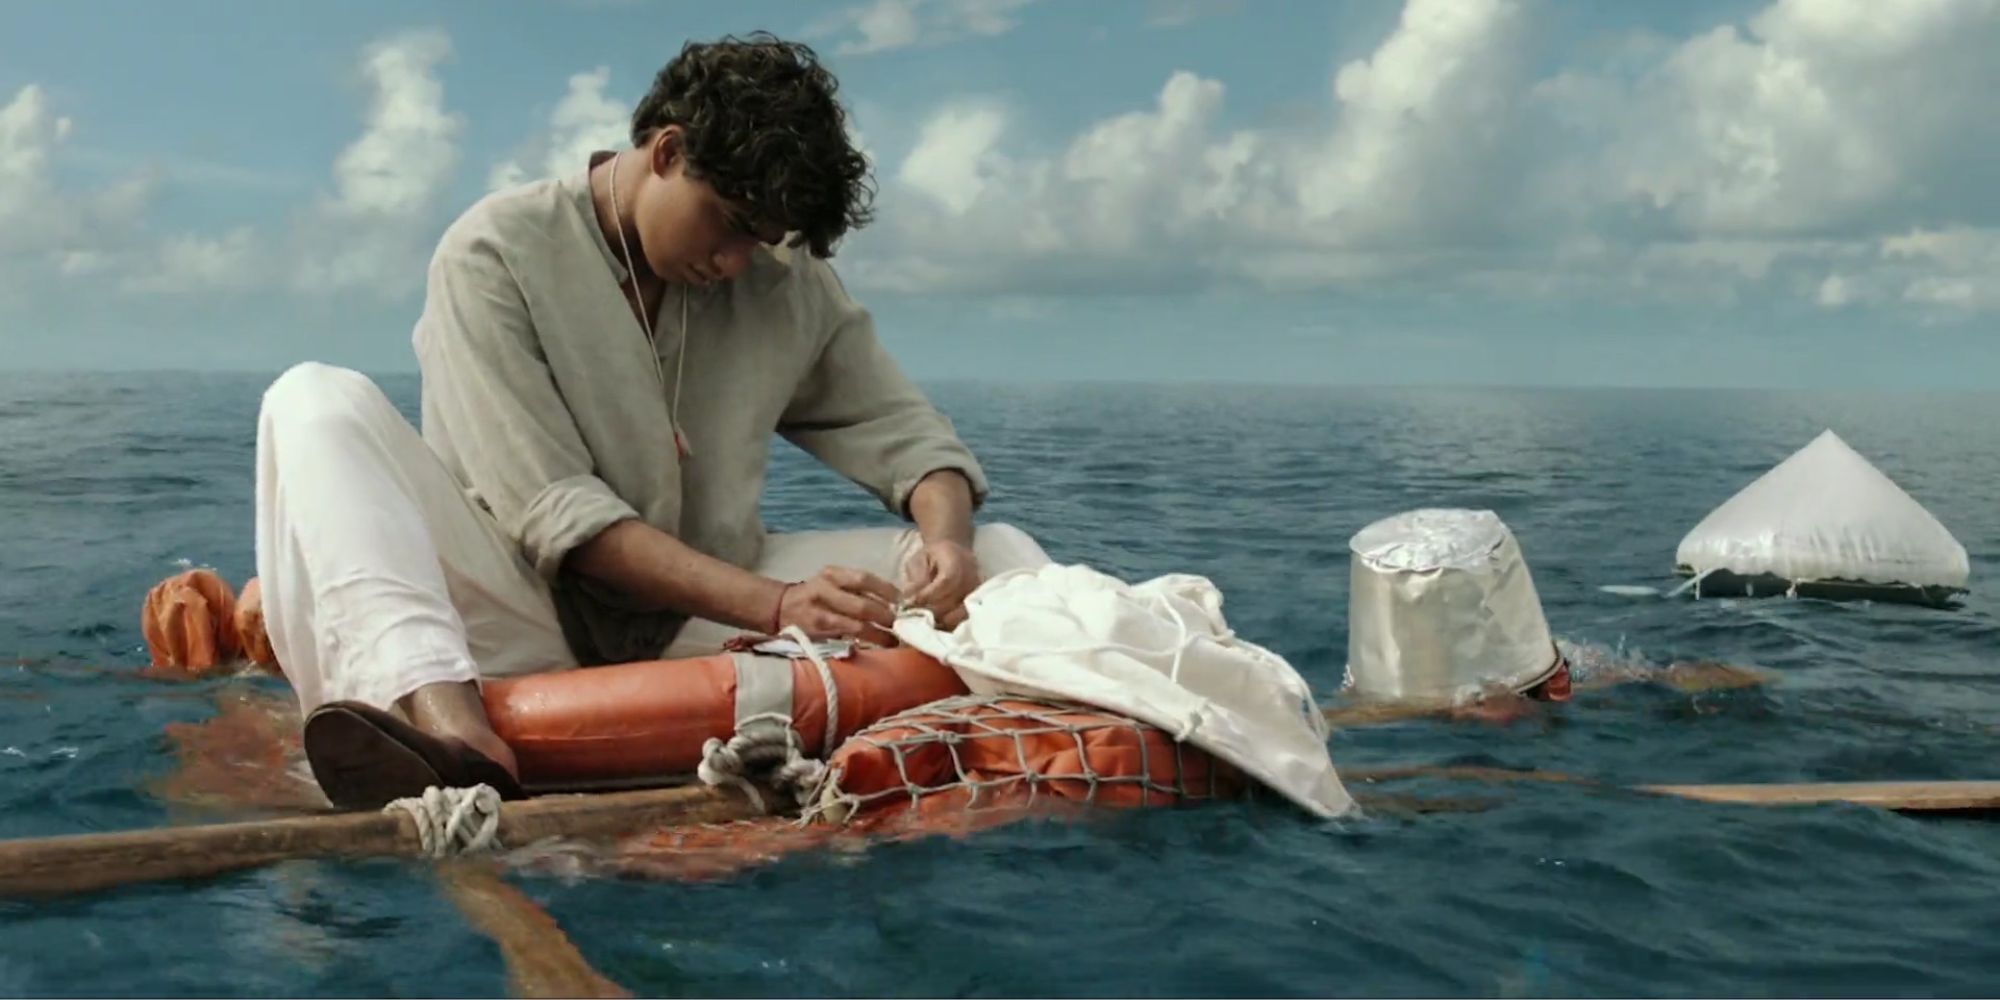 Pi builds a raft out of life preserver rings, tarps, rope, and oars to get away from the tiger on his lifeboat